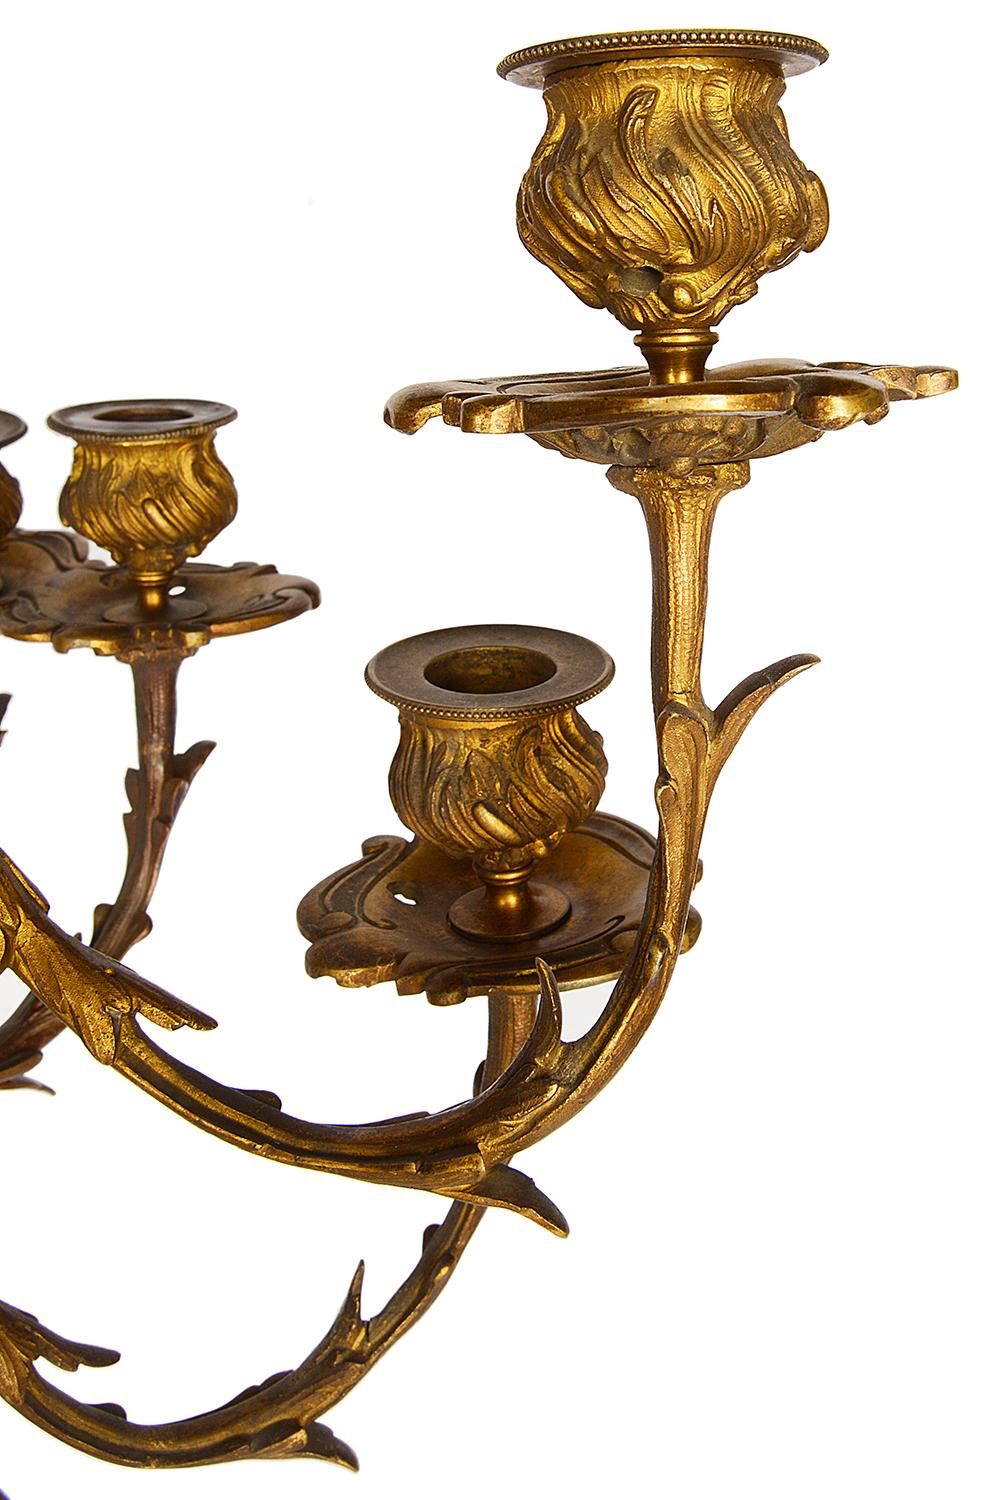 Large Pair of Early 19th Century Gilded Ormolu Candelabra For Sale 4